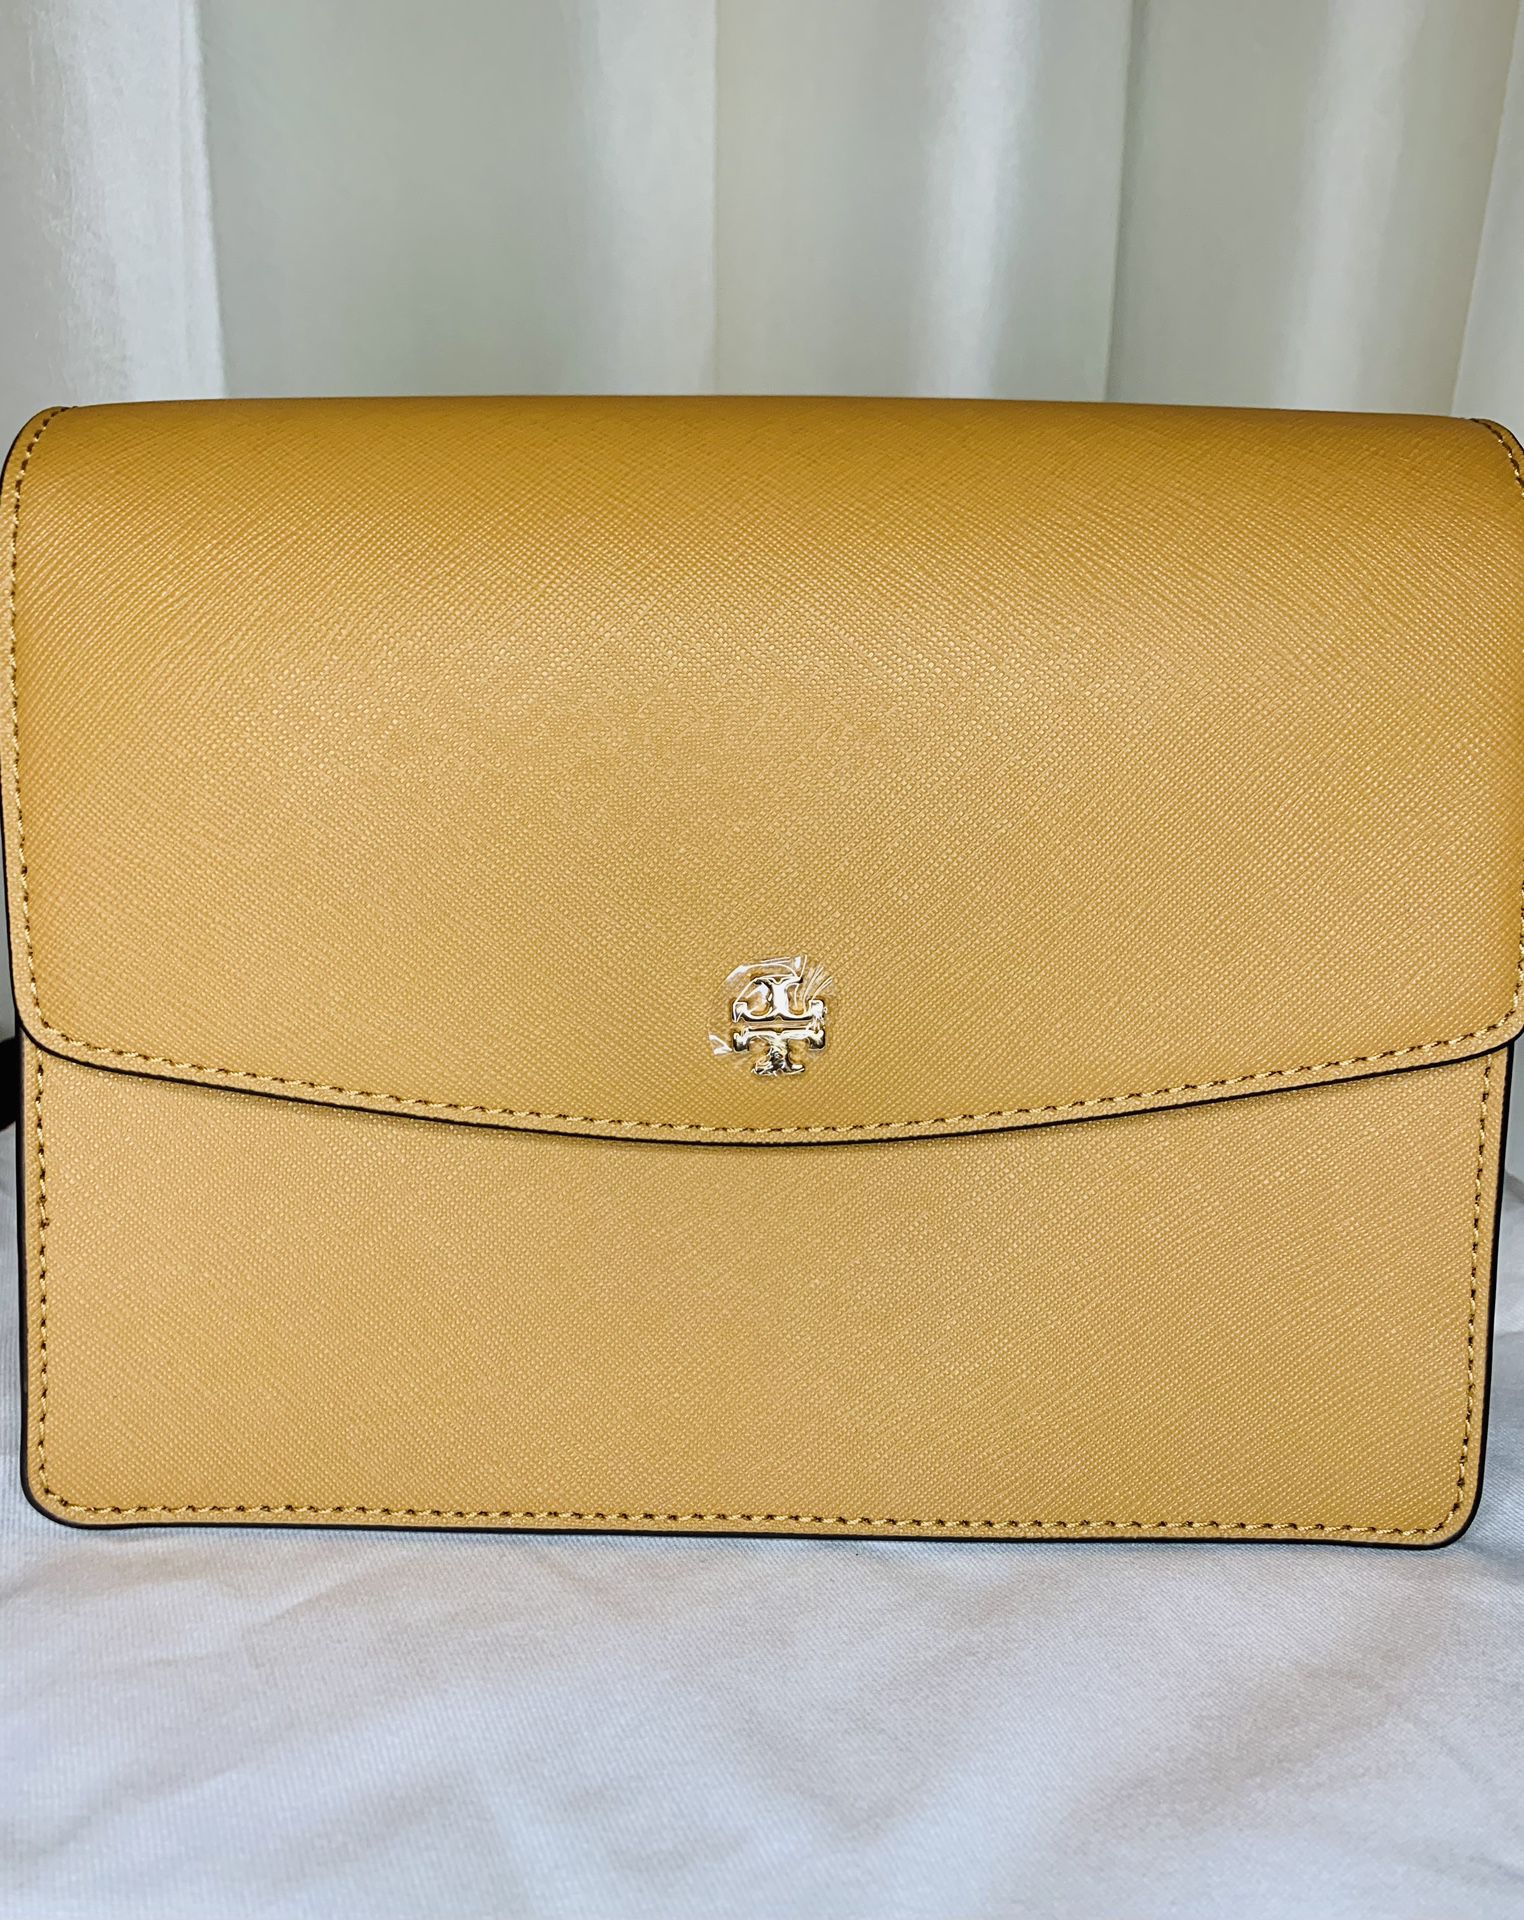 NWT Tory Burch Emerson Envelope Crossbody Bag Safffiano Leather CARDAMOM  for Sale in Los Angeles, CA - OfferUp